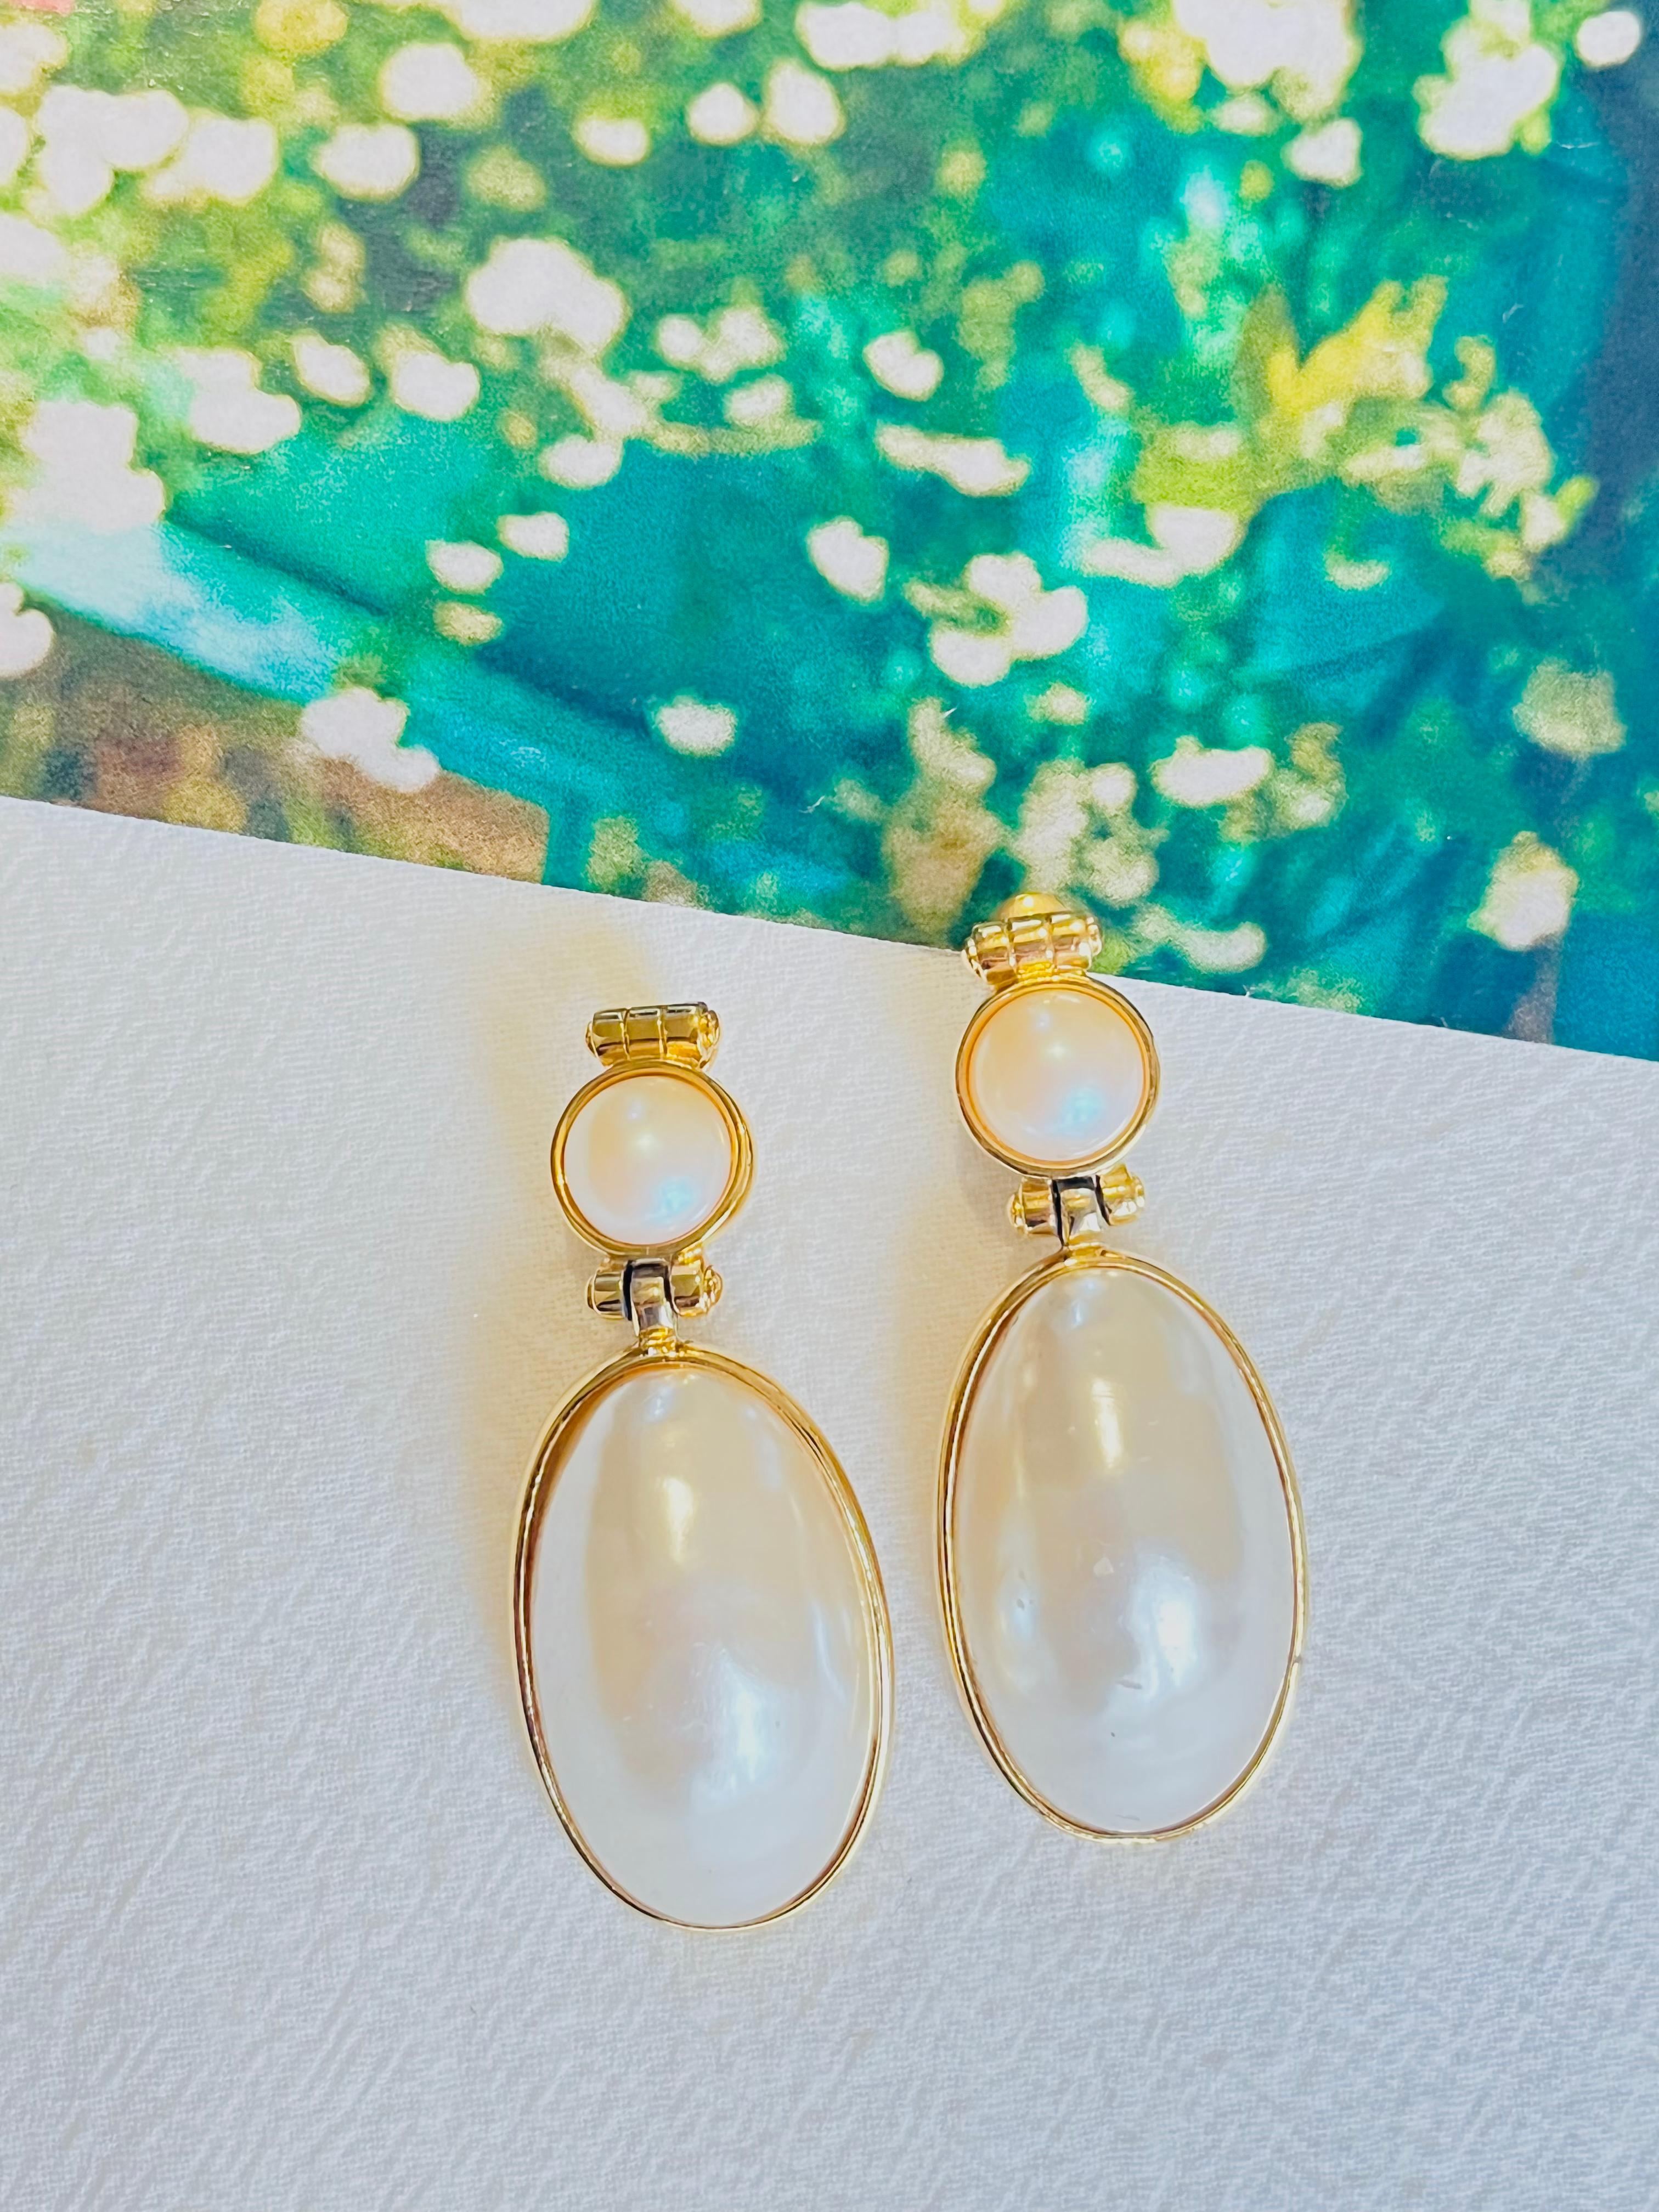 Very excellent condition and very unique. Very light scratches on faux pearls, barely noticeable. 100% Genuine.

Givenchy Signed clearly on the reverse.

Material: Gold Plated, Faux Pearls.

Size: 5.5*2.2 cm.

Weight: 14 g/each.

_ _ _

Great for